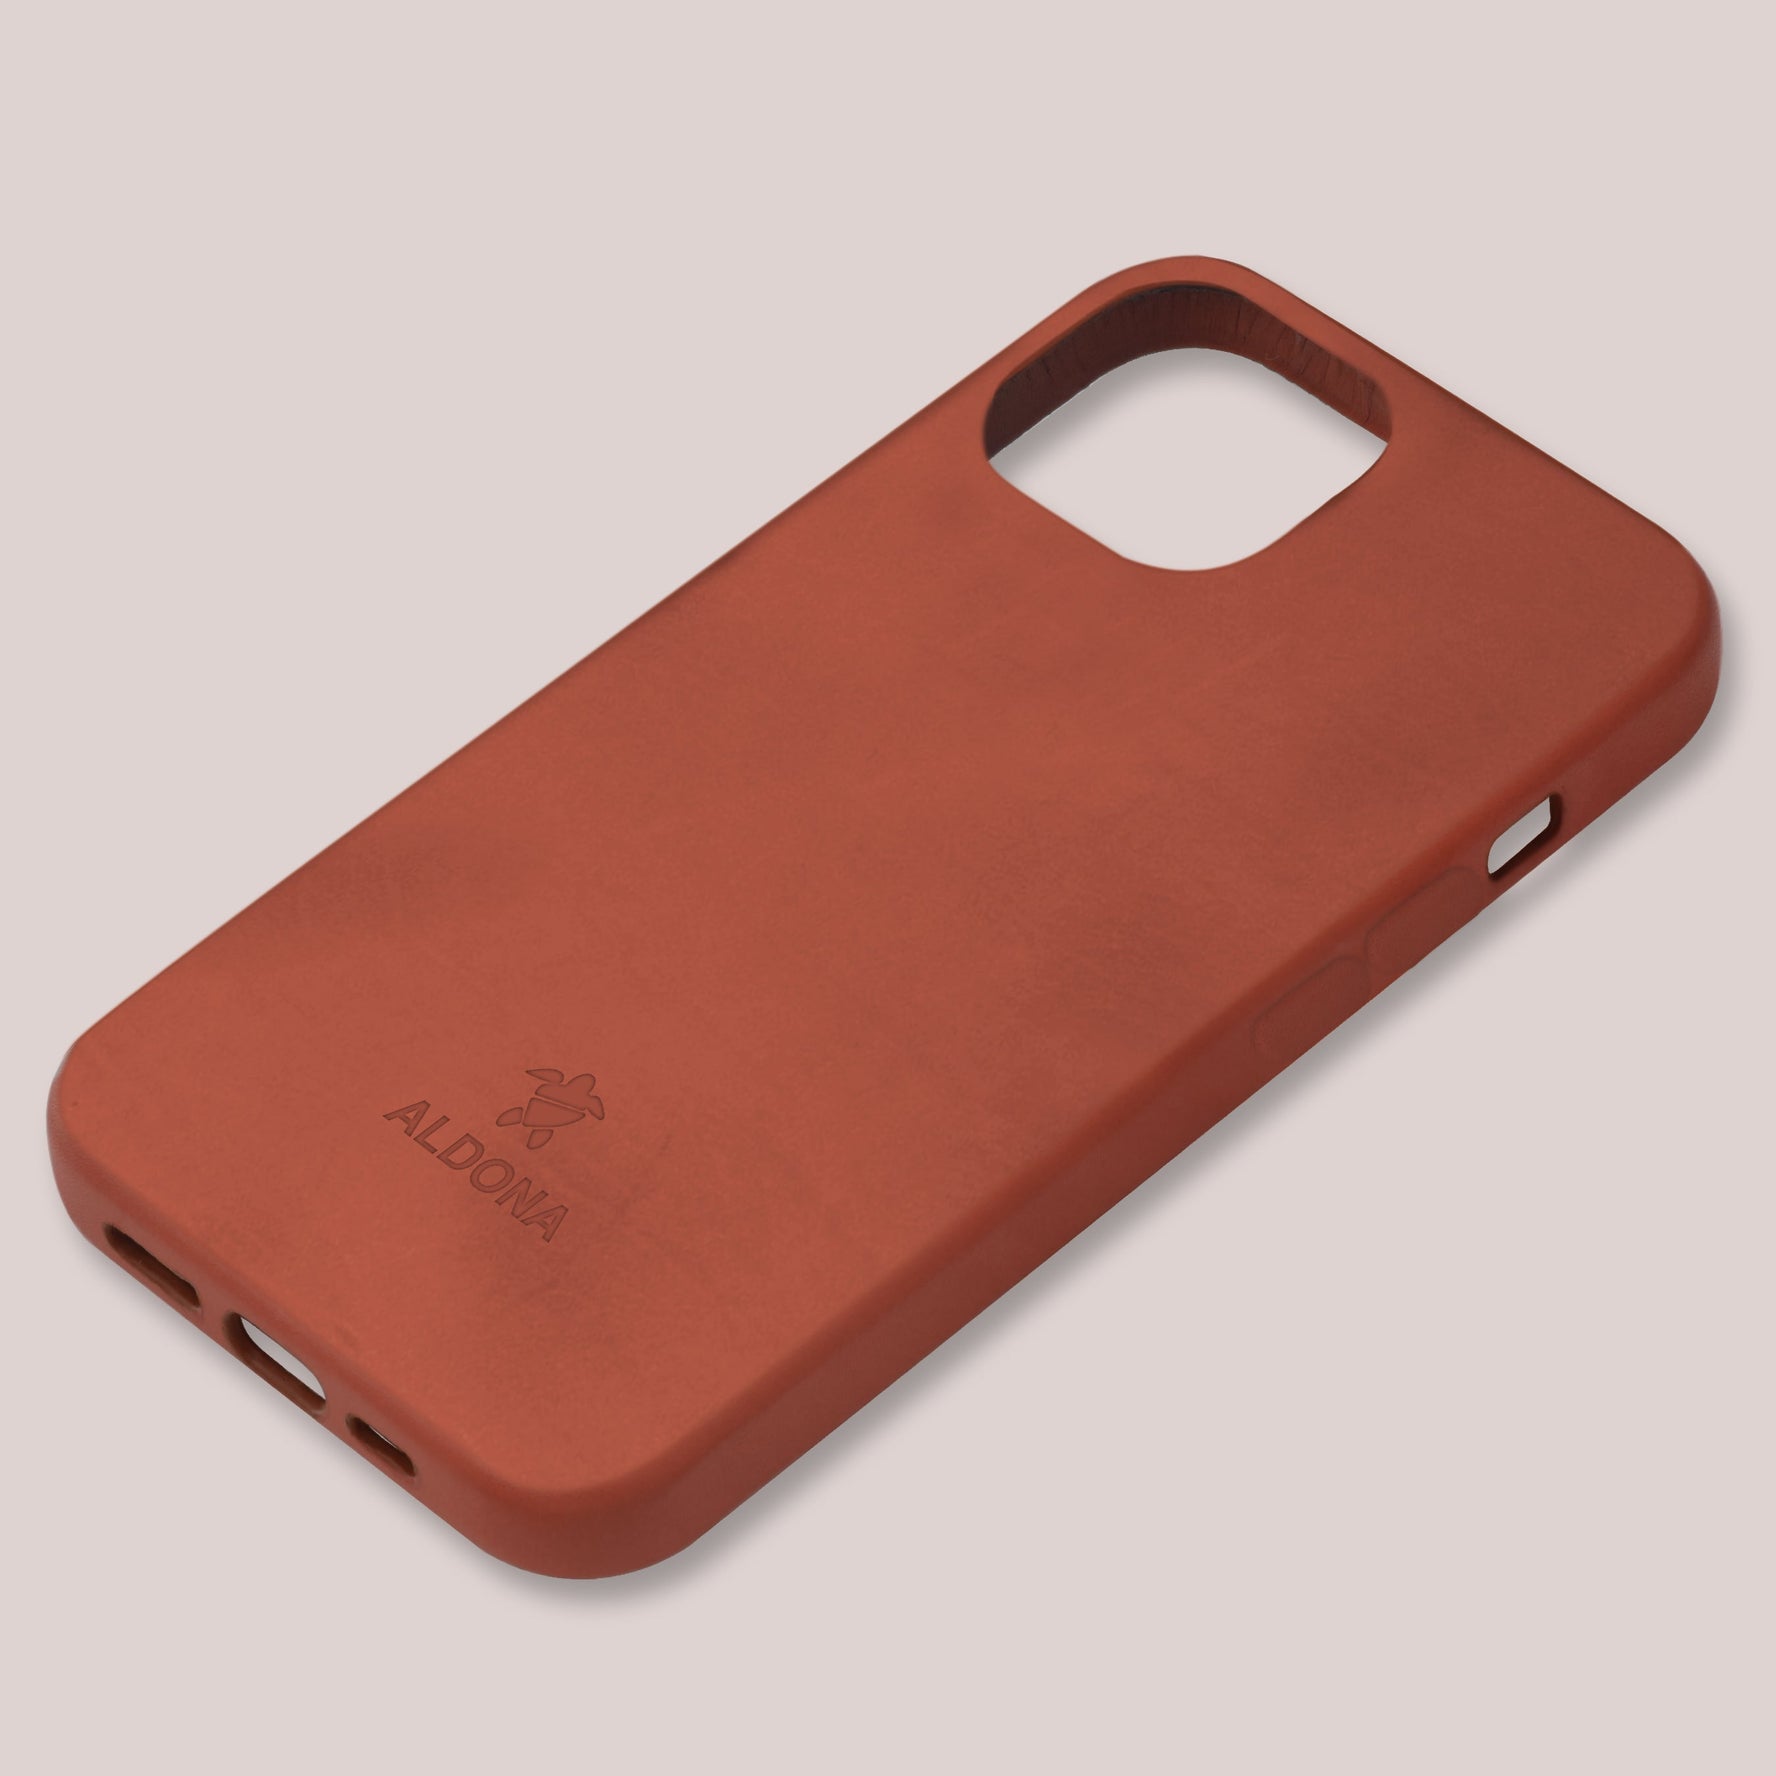 Kalon Case for iPhone 13 Pro with MagSafe Compatibility - Cognac